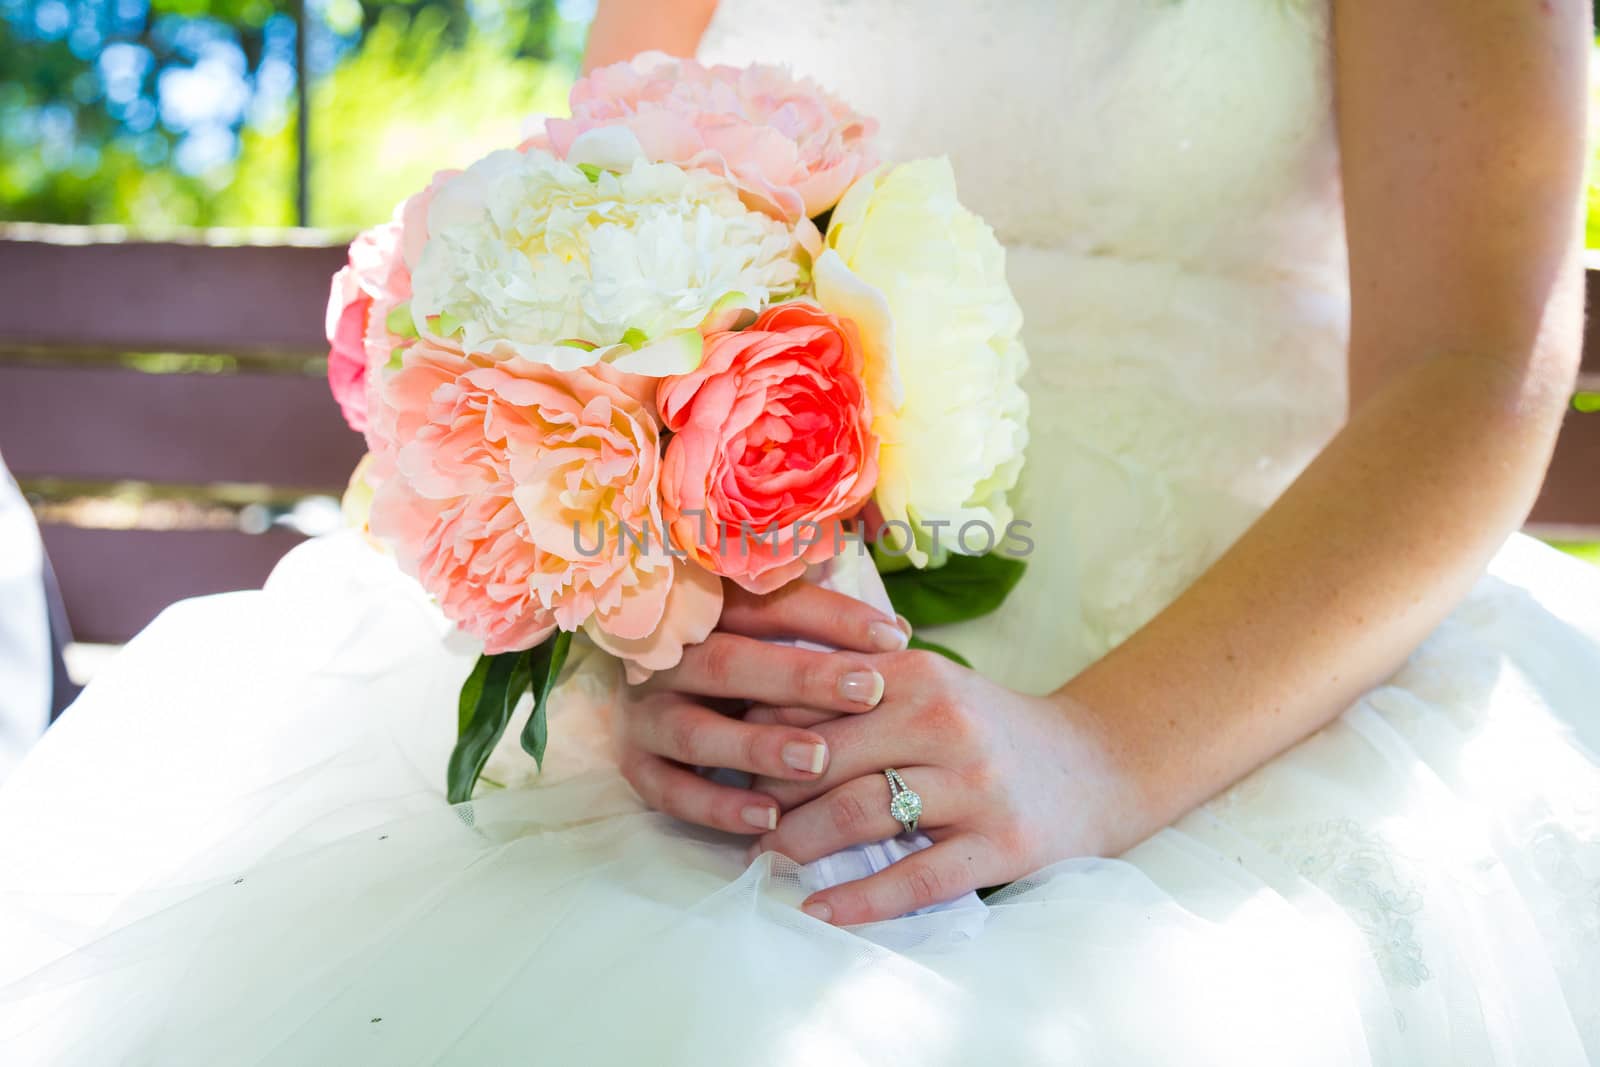 This bride holds her bouquet of white and pink flowers against her white wedding dress.